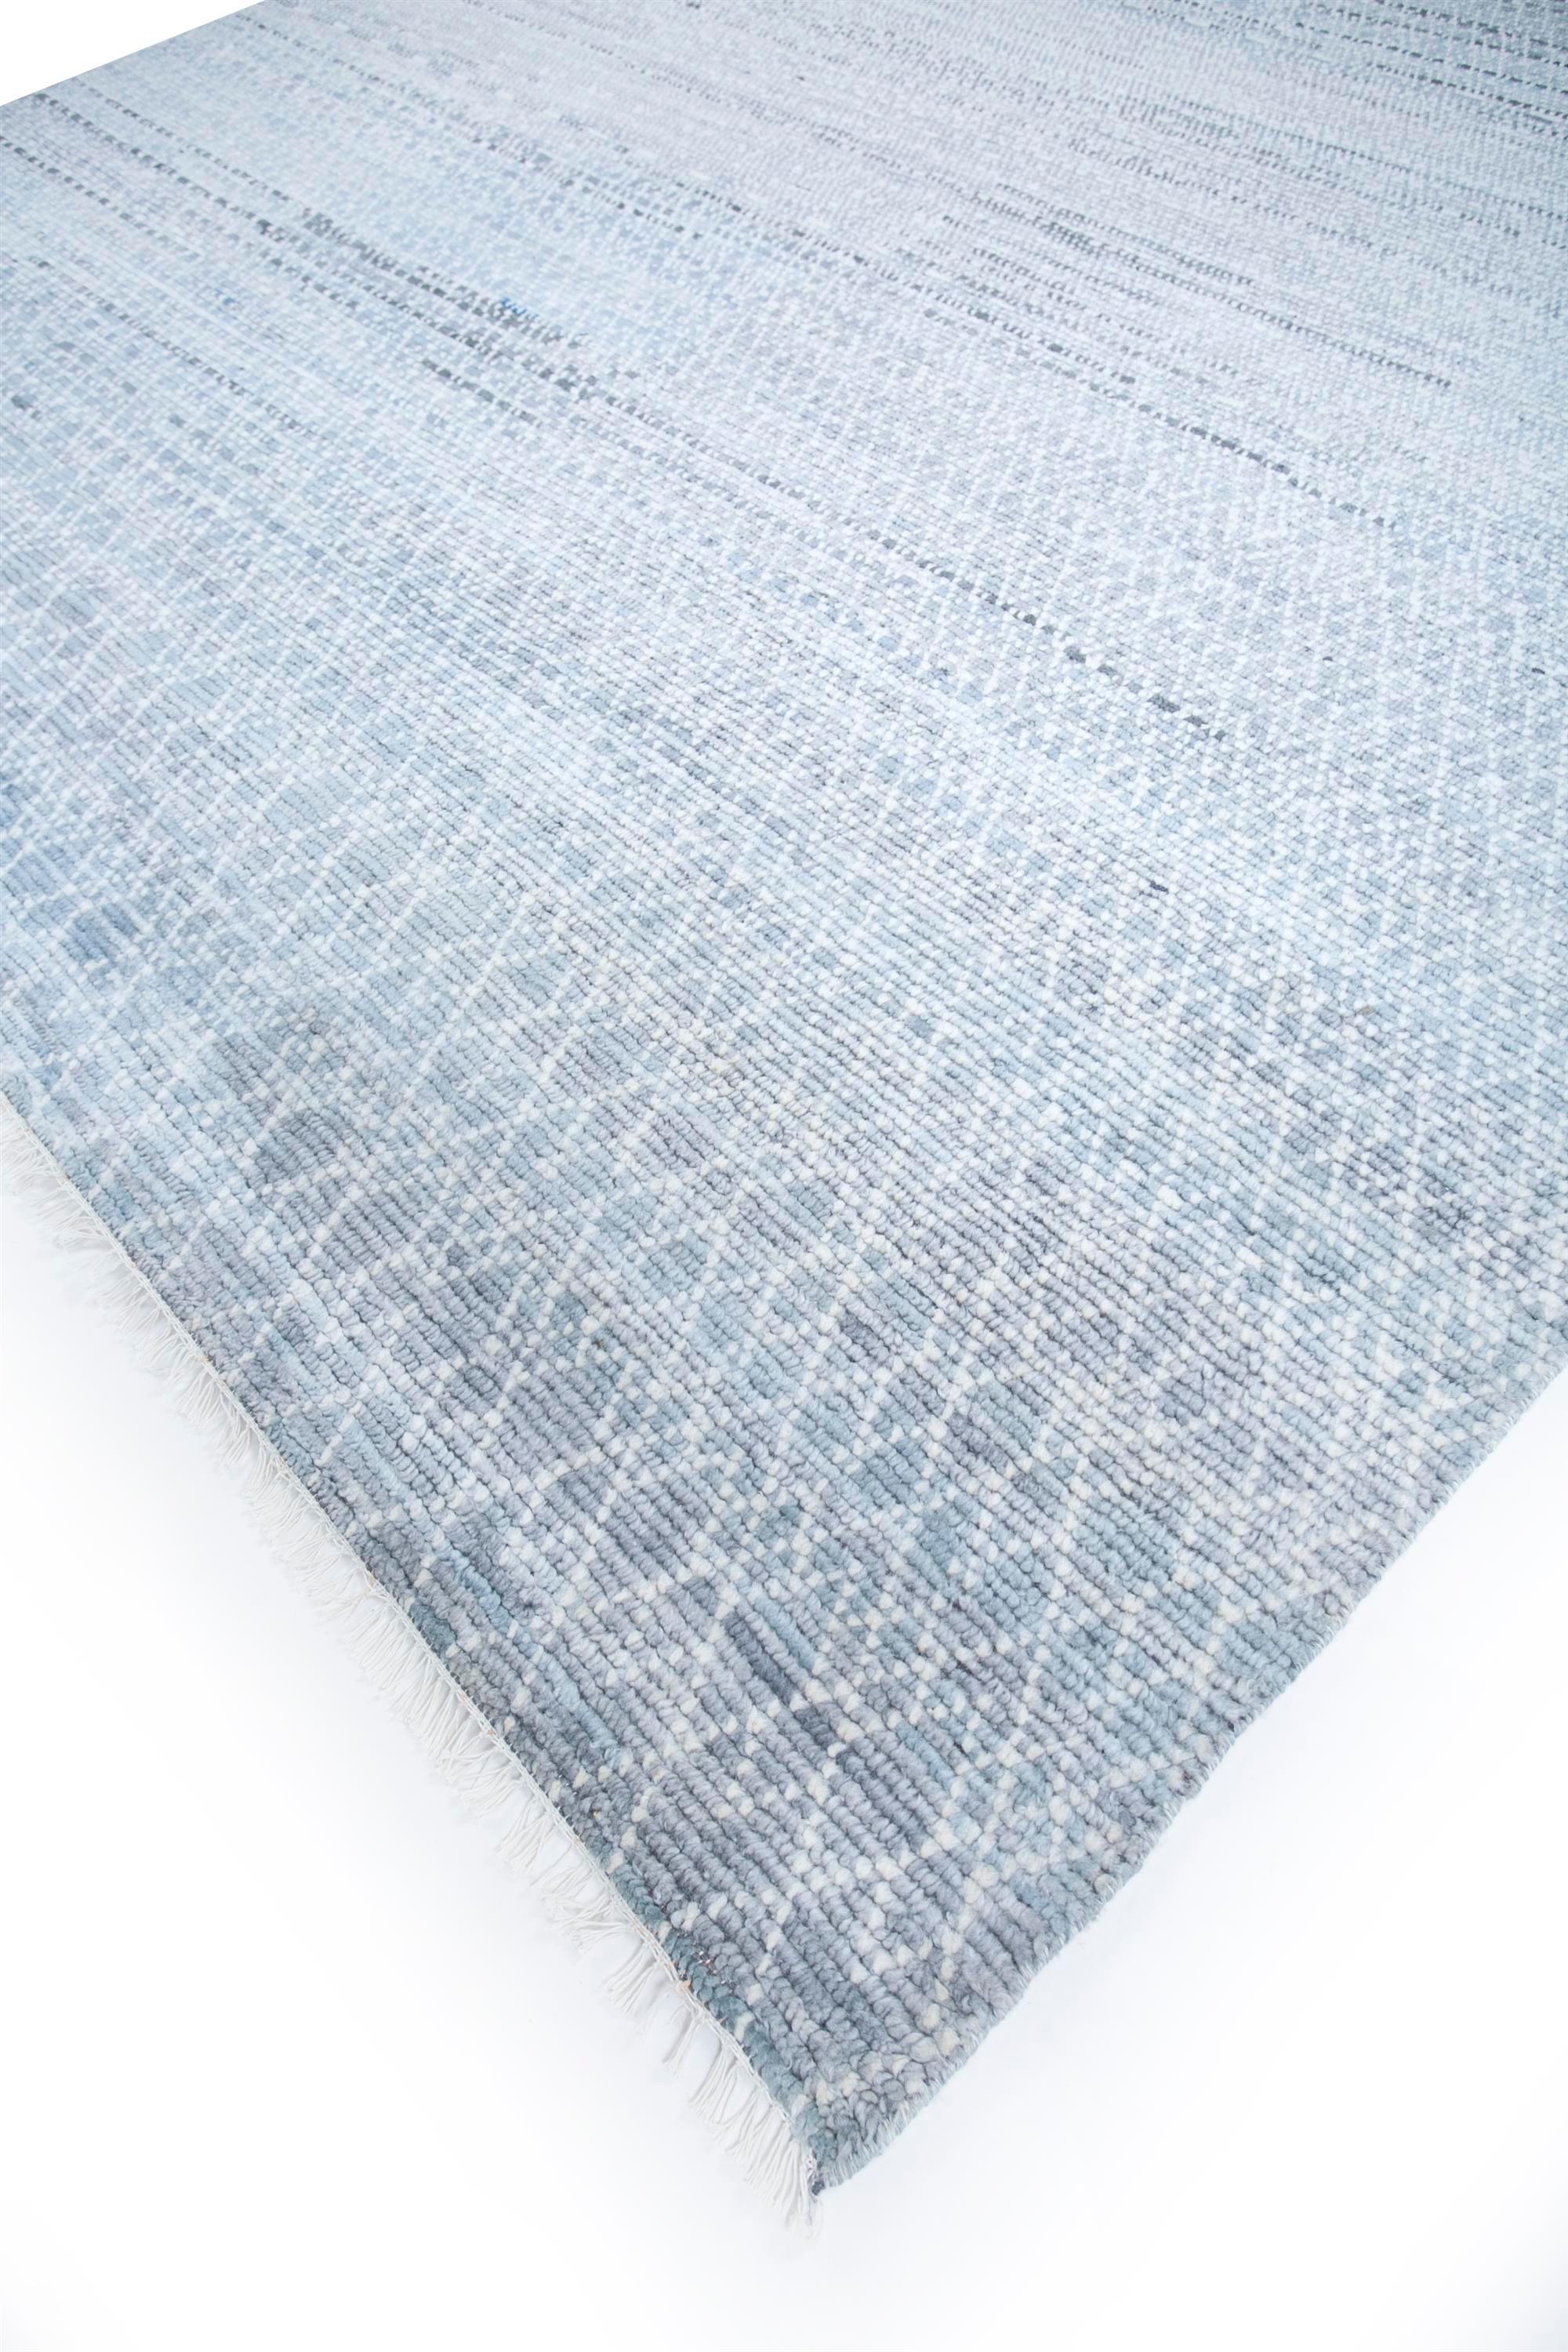 Indian Frosty Illusion White & Medium Blue 270x375 cm Hand Knotted Rug For Sale